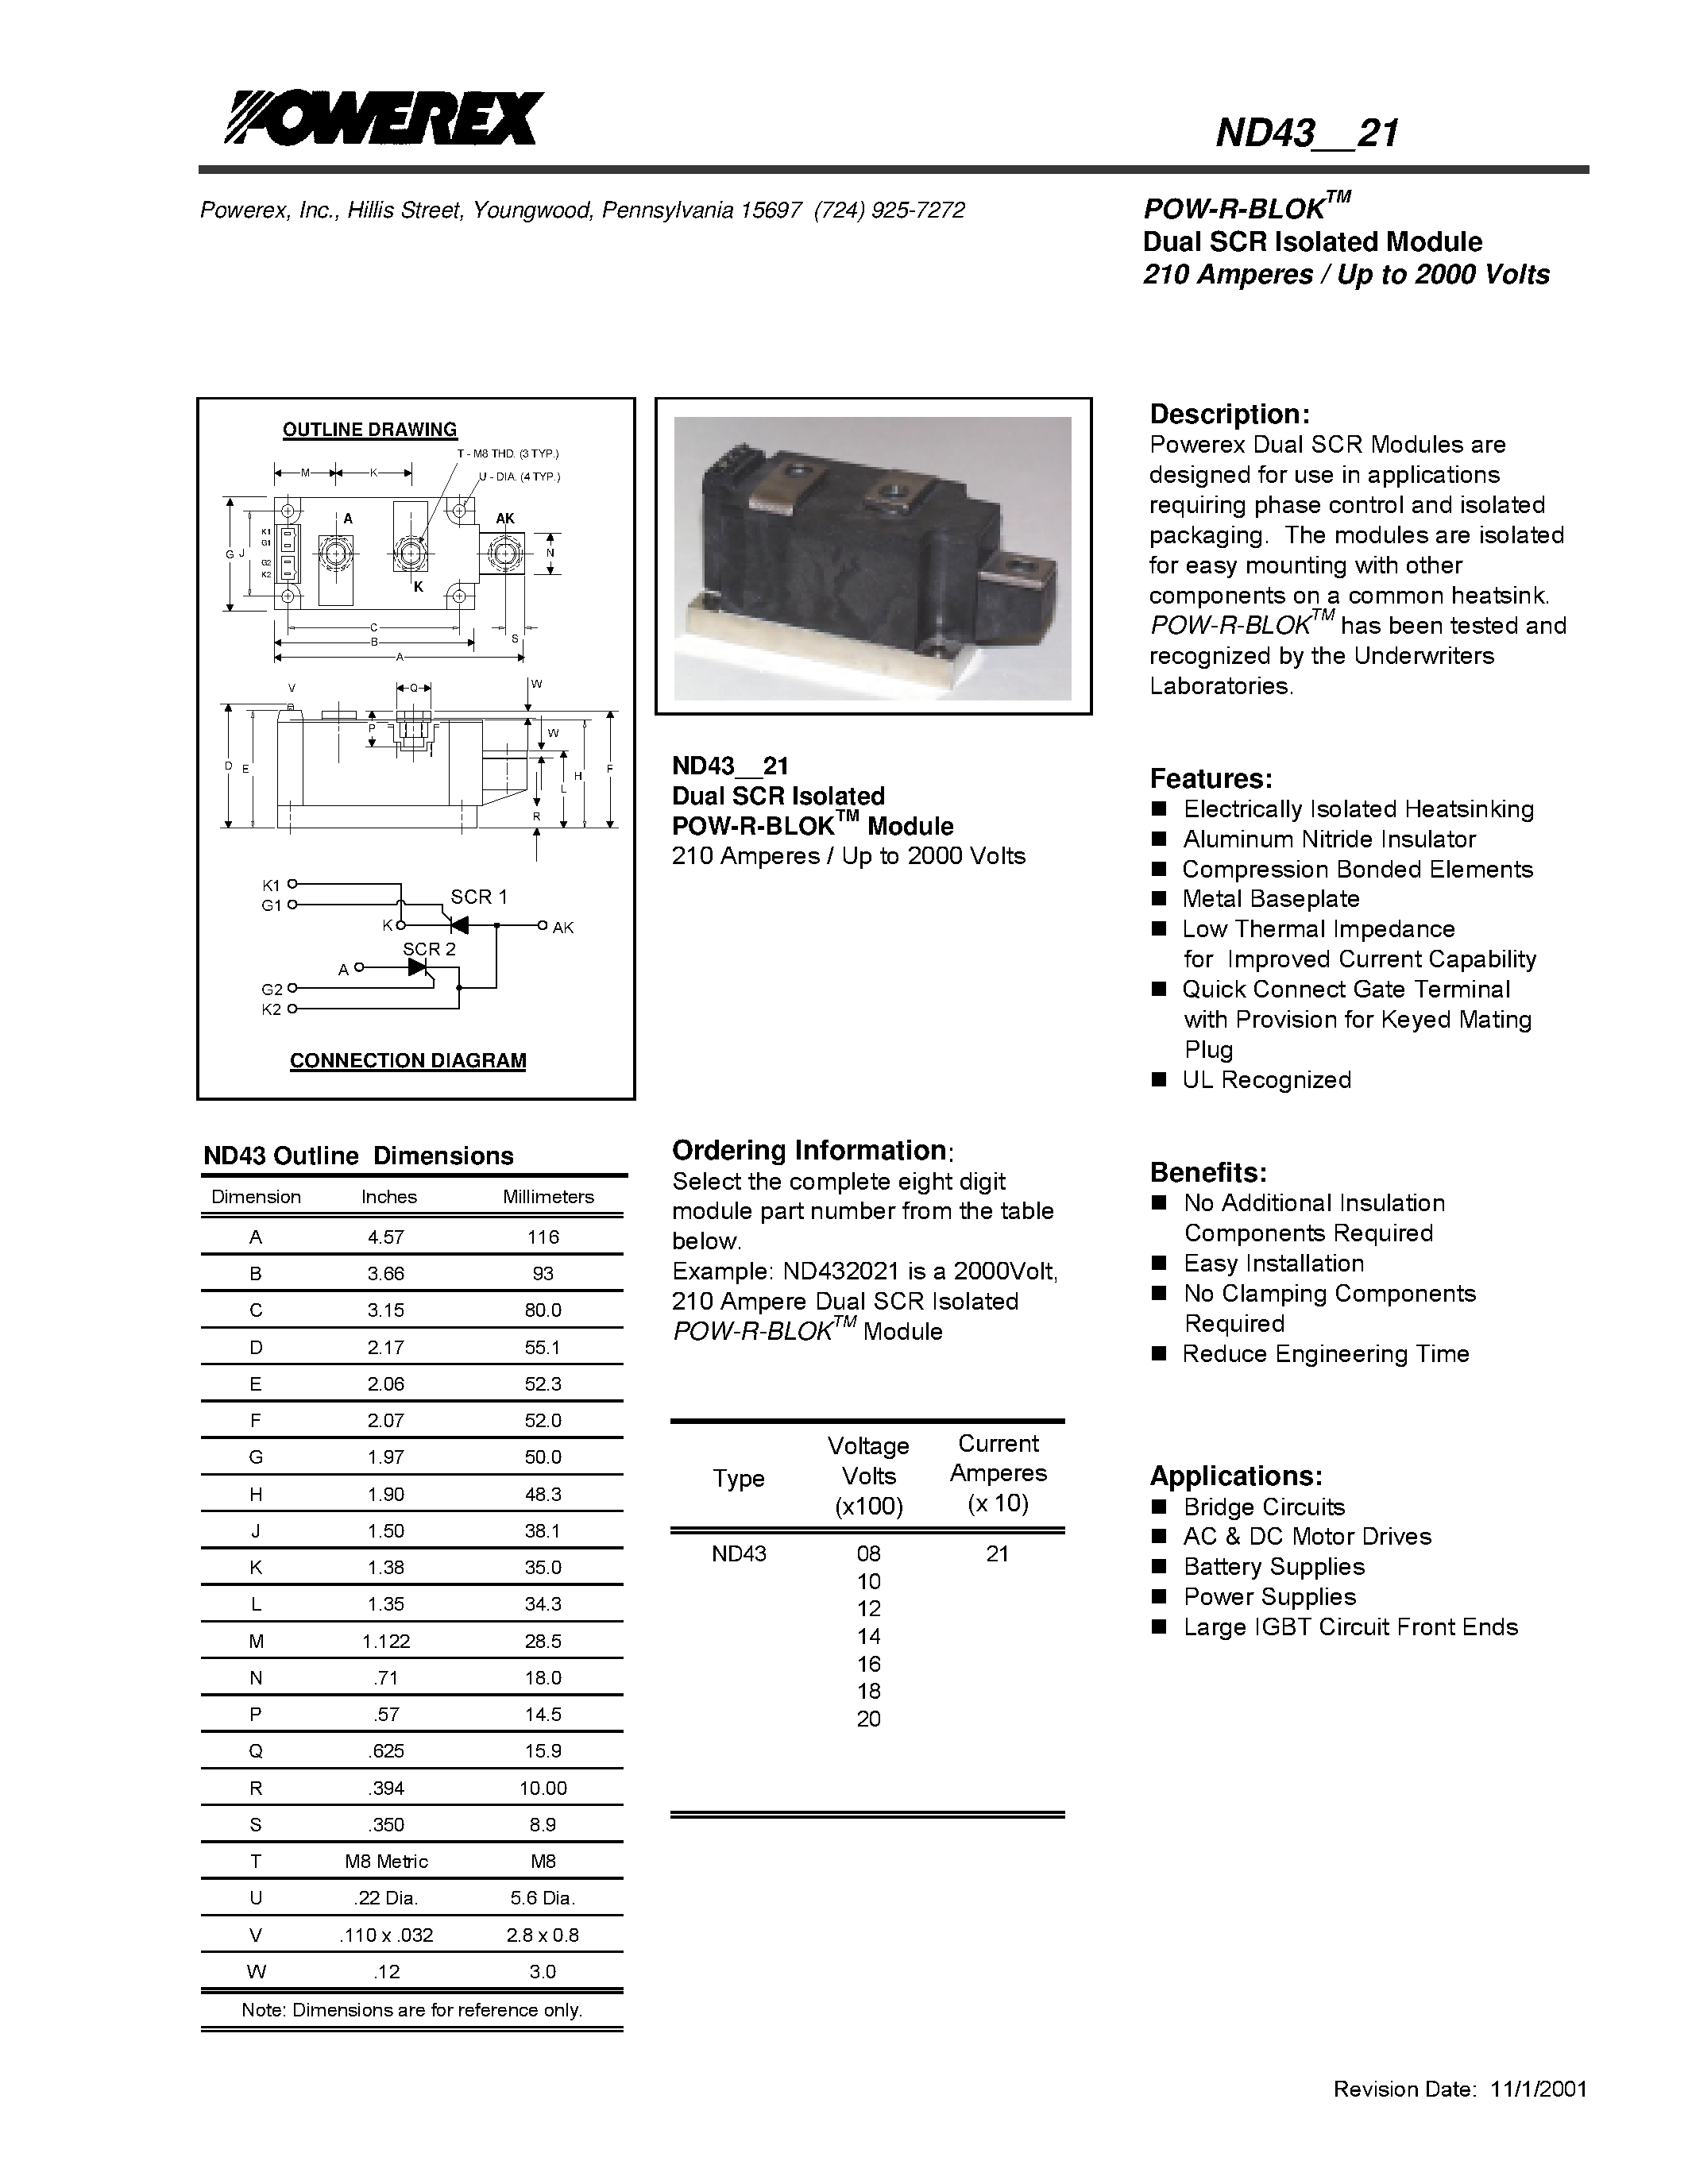 Datasheet ND431221 - POW-R-BLOK Dual SCR Isolated Module (210 Amperes / Up to 2000 Volts) page 1